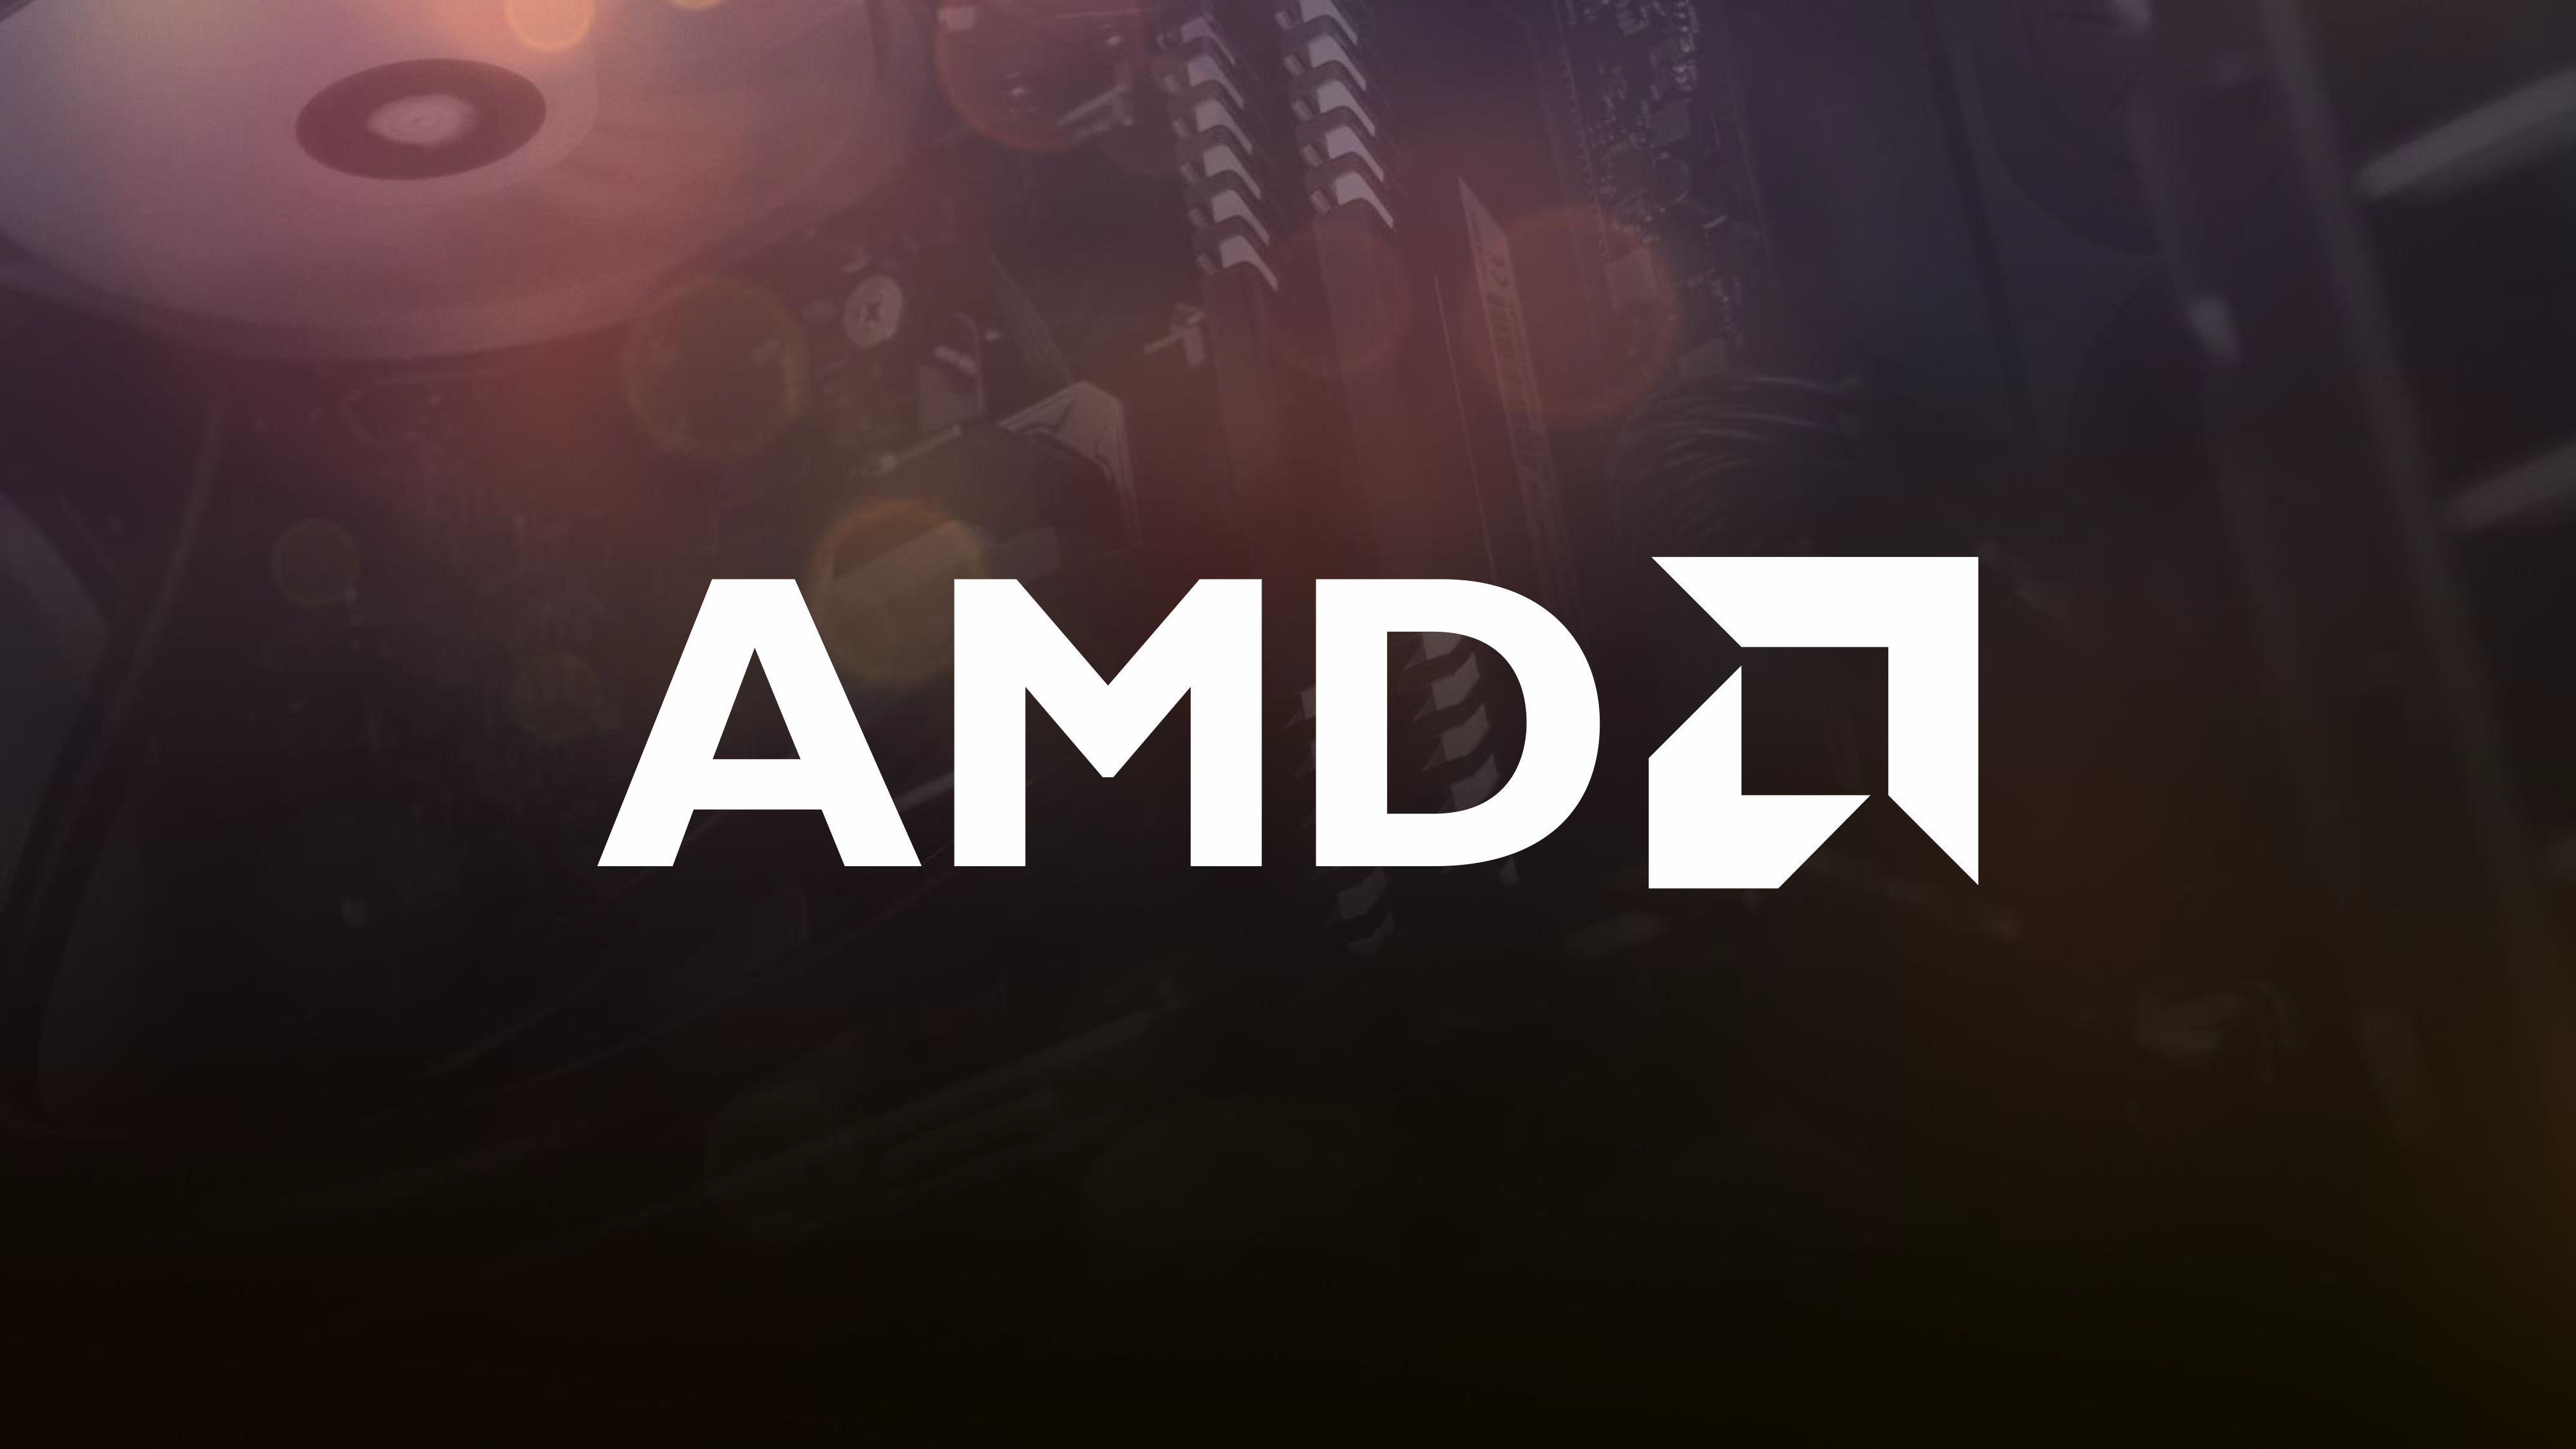 AMD Wallpaper From the Slides